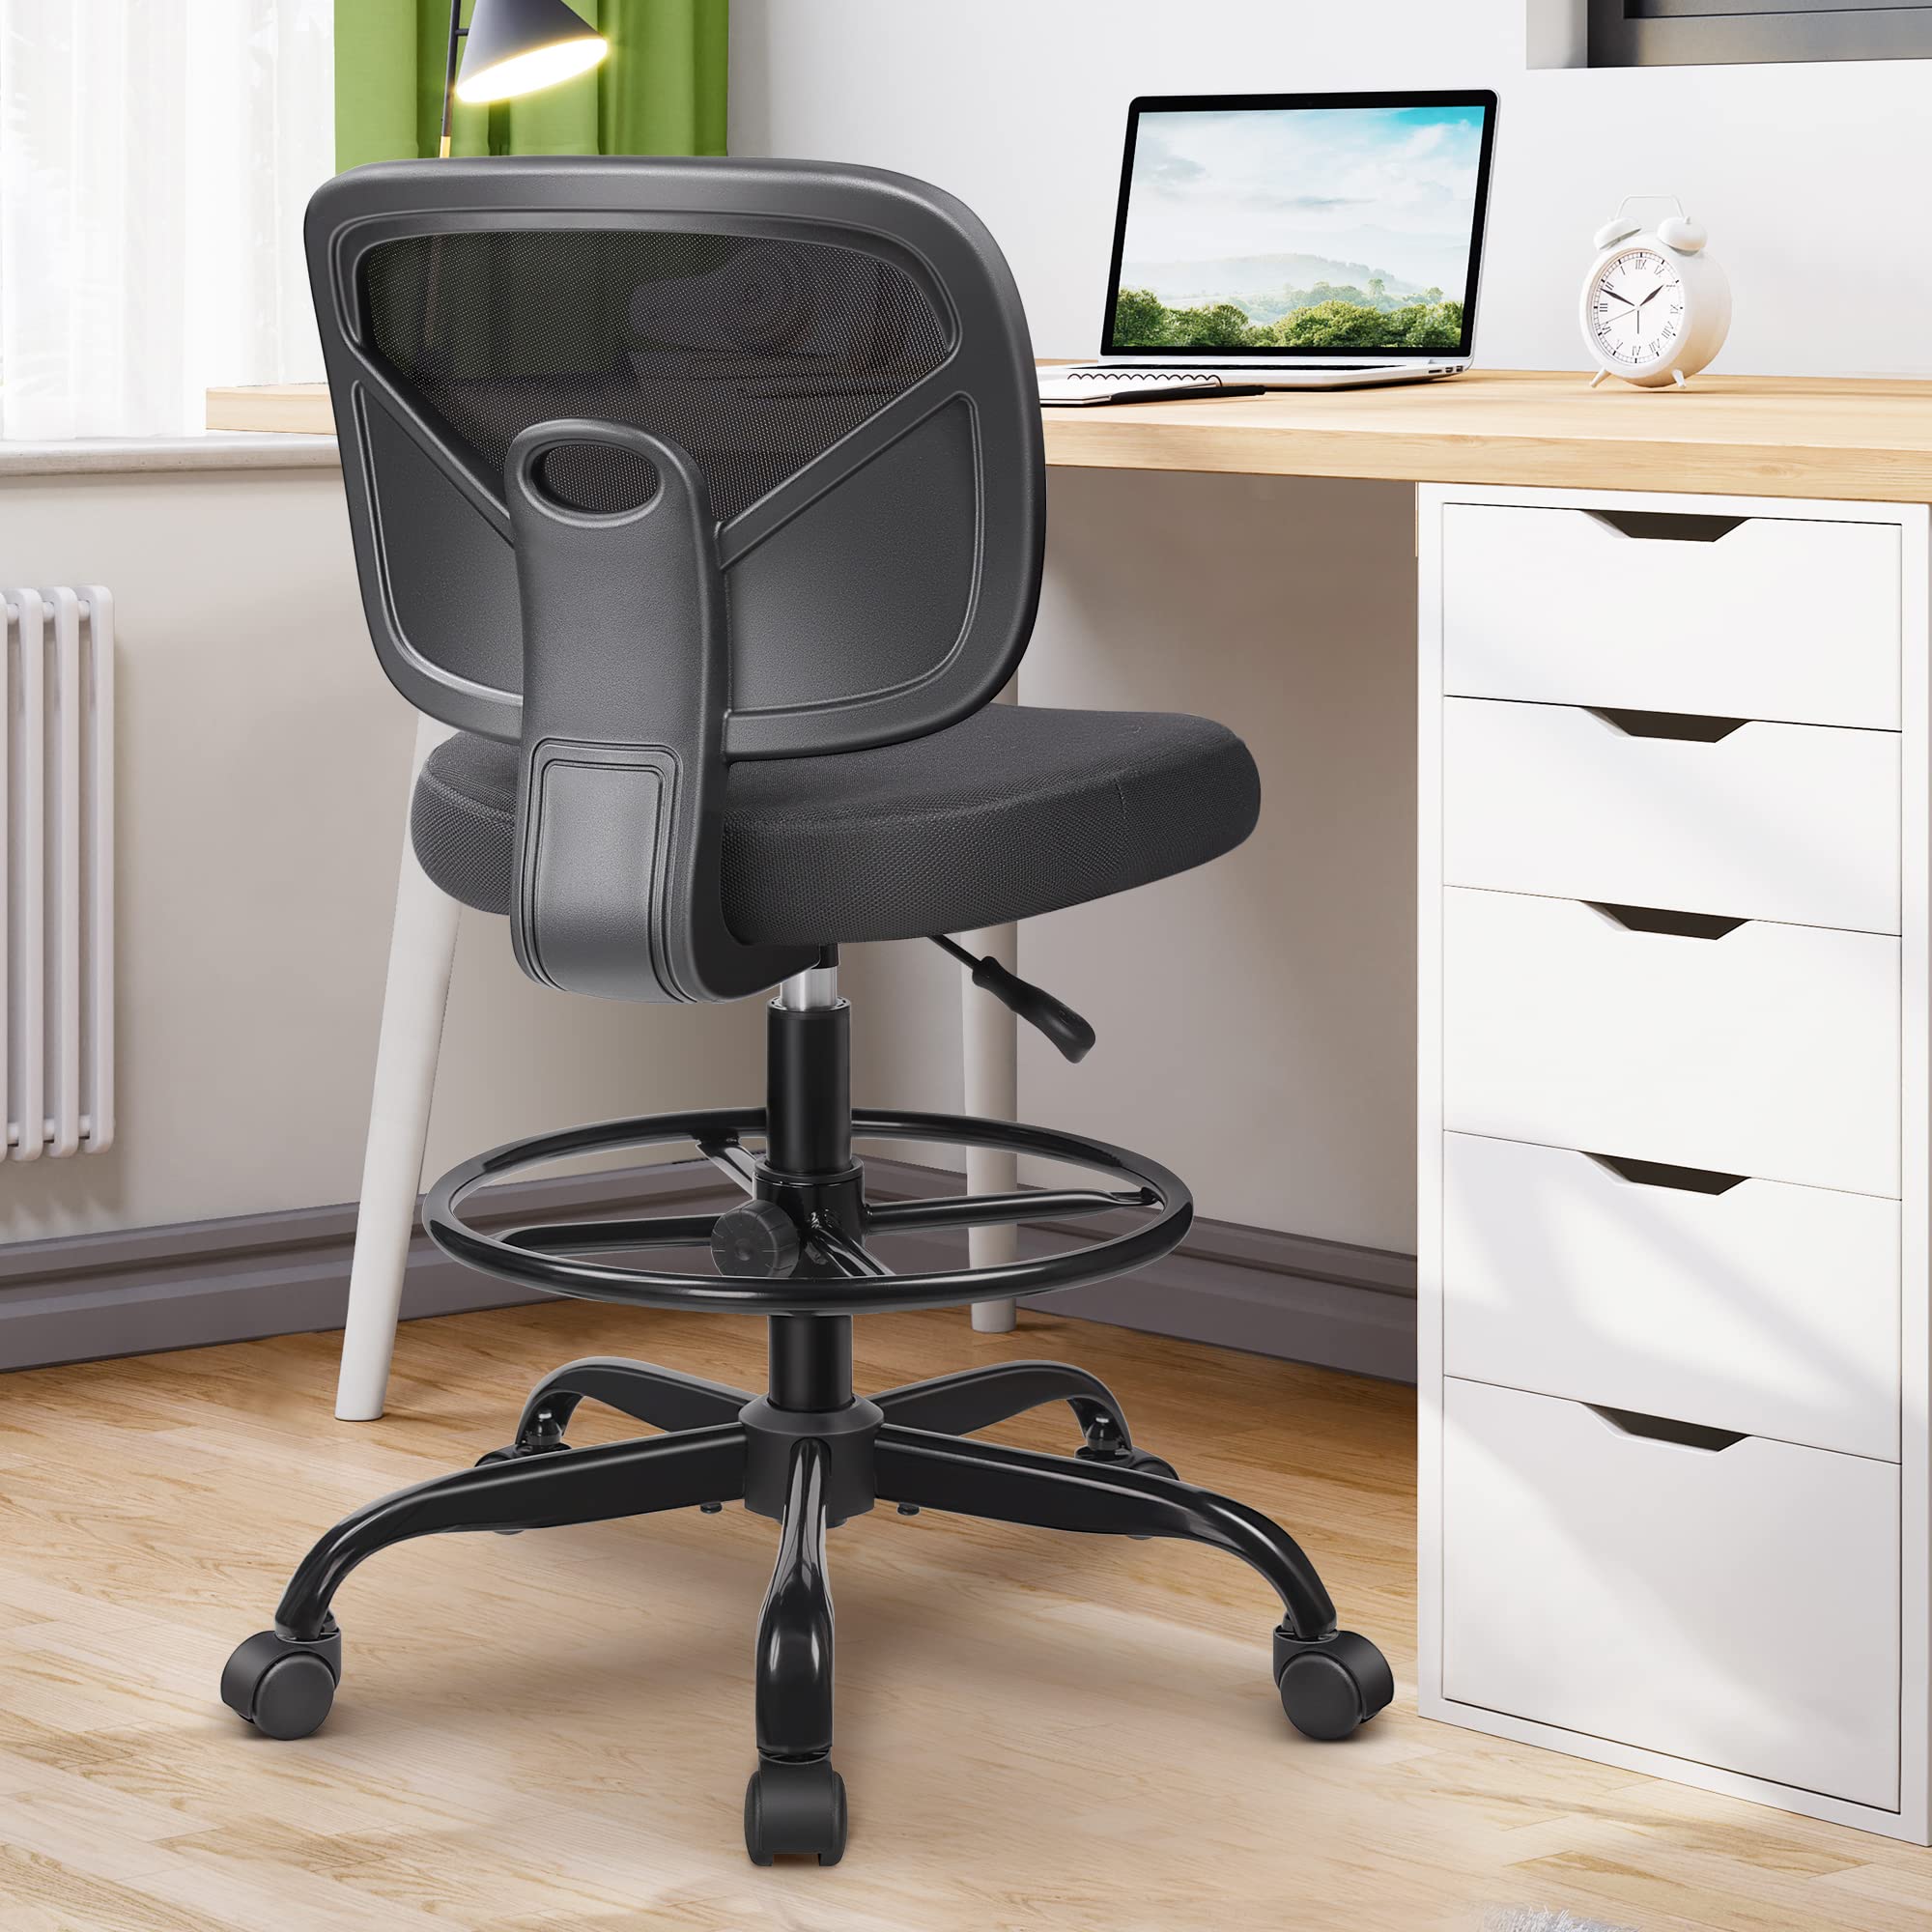 Mesh Drafting Chair Tall Office Chair for Standing Desk Ergonomic Back Support Desk Chair Adjustable Height Task Chair with Foot Ring and Adjustable